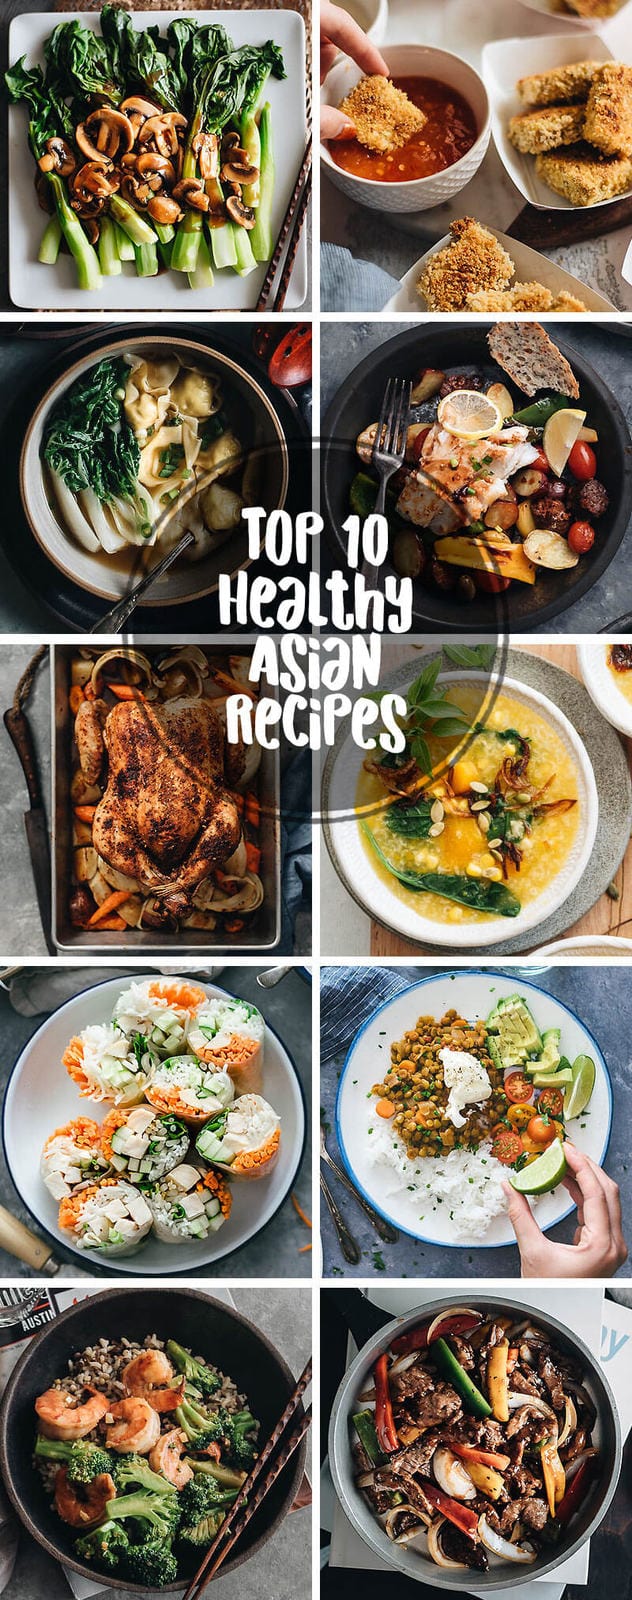 Top 10 Healthy Asian Recipes to Kick Off the New Year